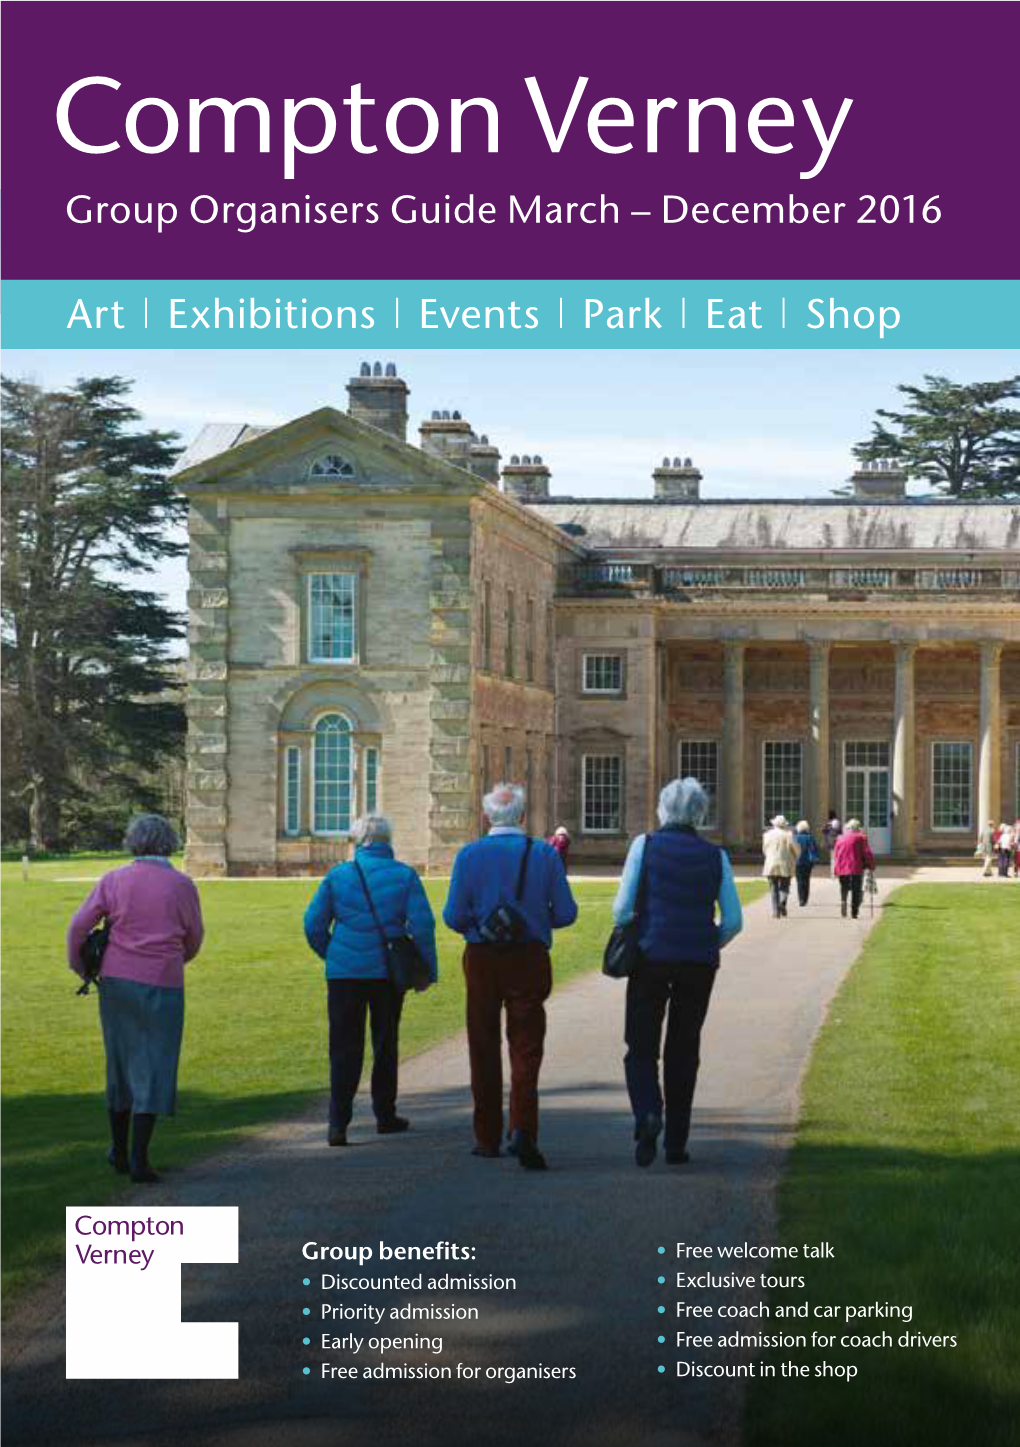 Compton Verney Group Organisers Guide March – December 2016